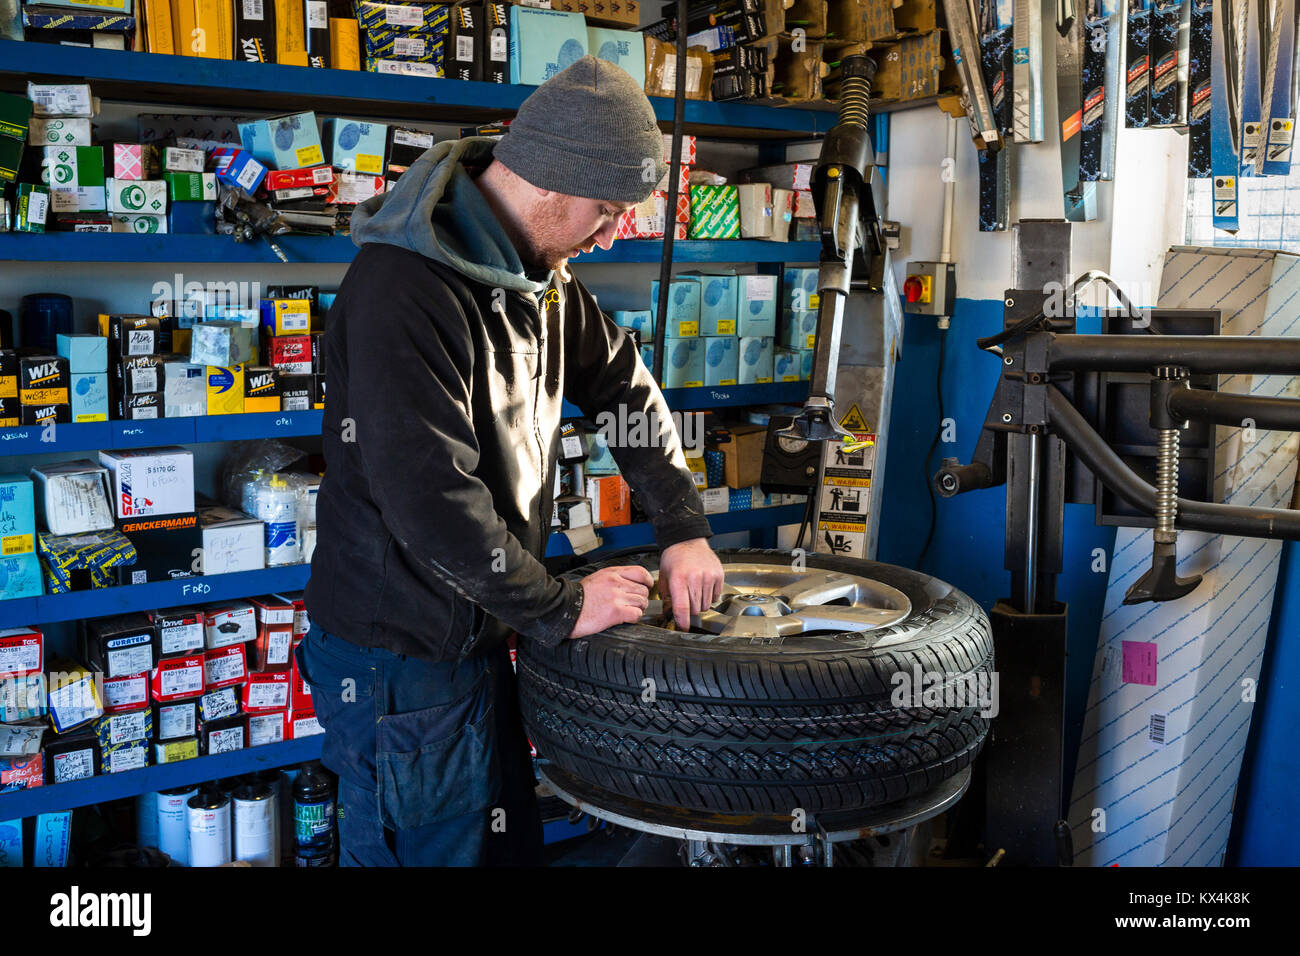 Apprentice Mechanic repairing a flat tyre with a compressor in garage Stock Photo